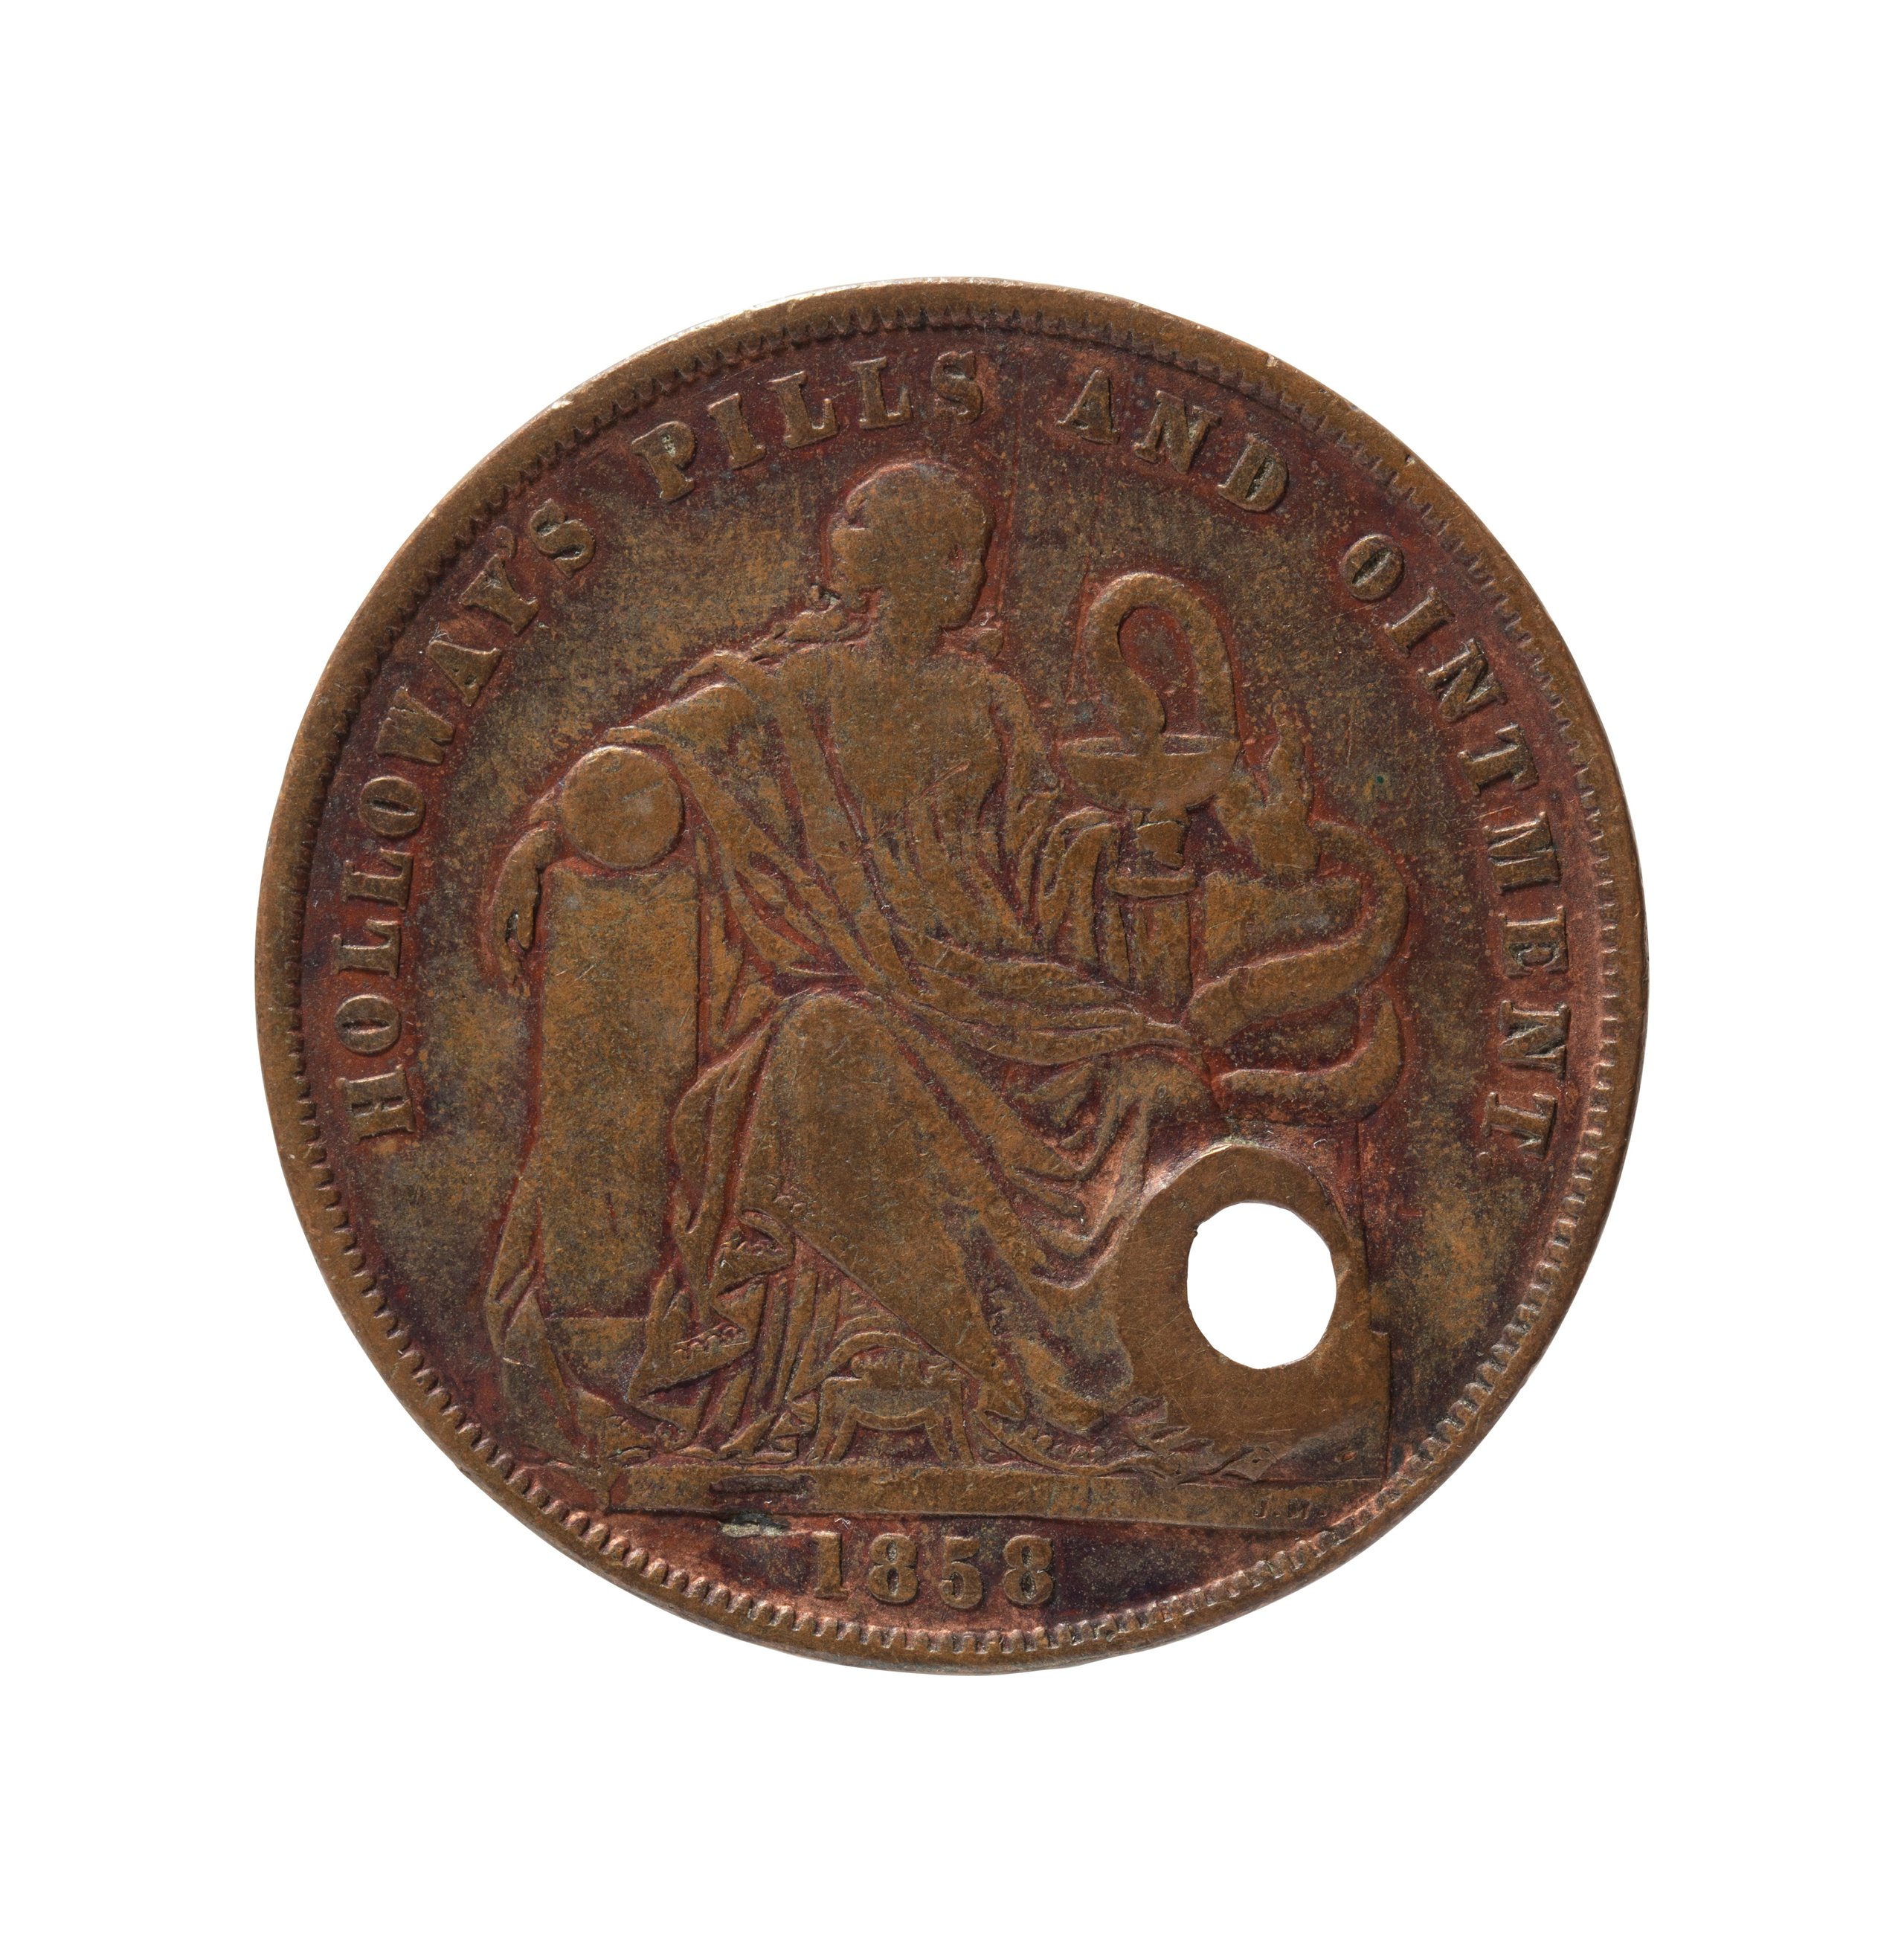 Penny token issued by Professor Holloway